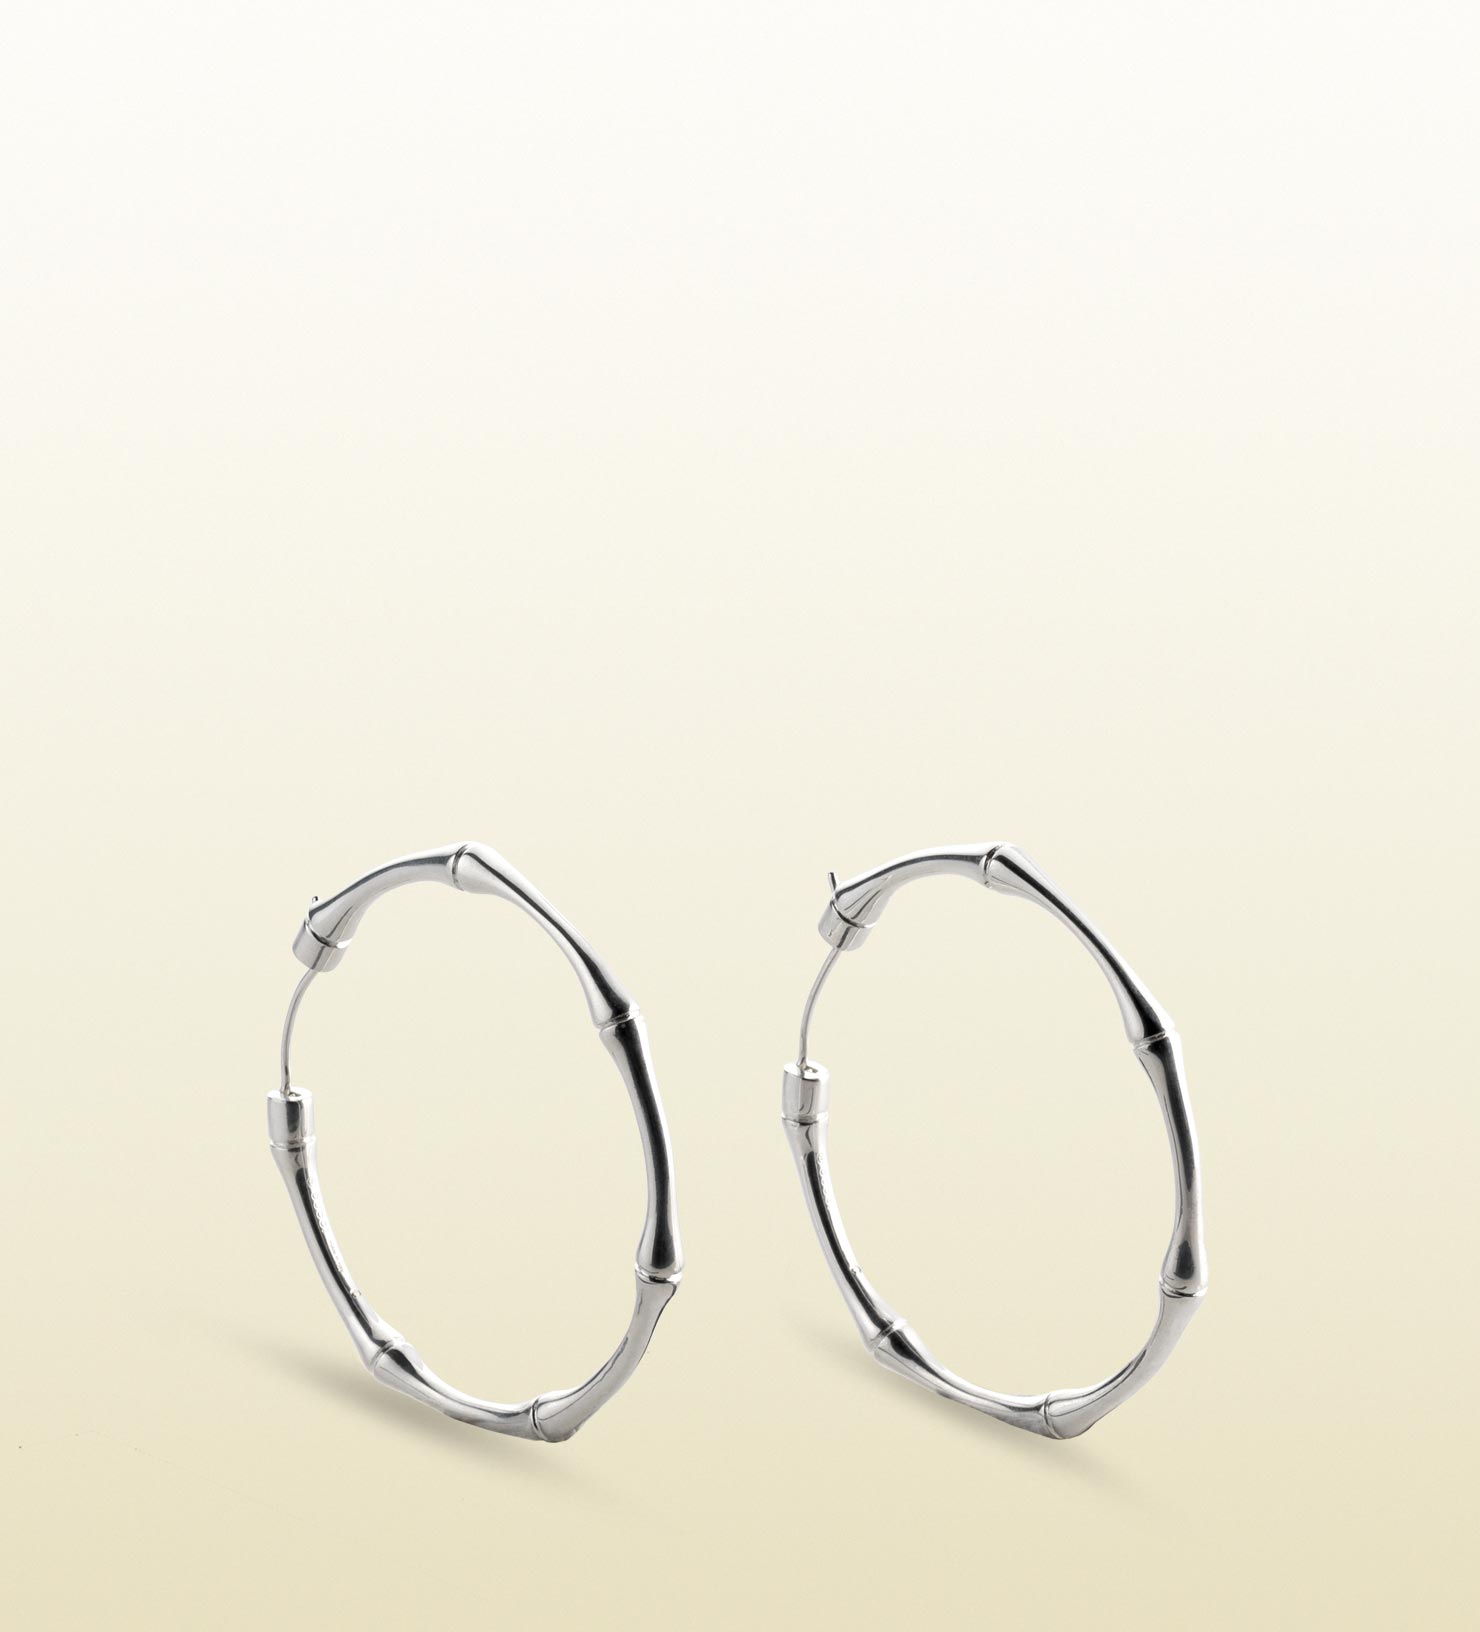 Gucci Bamboo Earrings Online, 53% OFF | carrosselfest.com.br